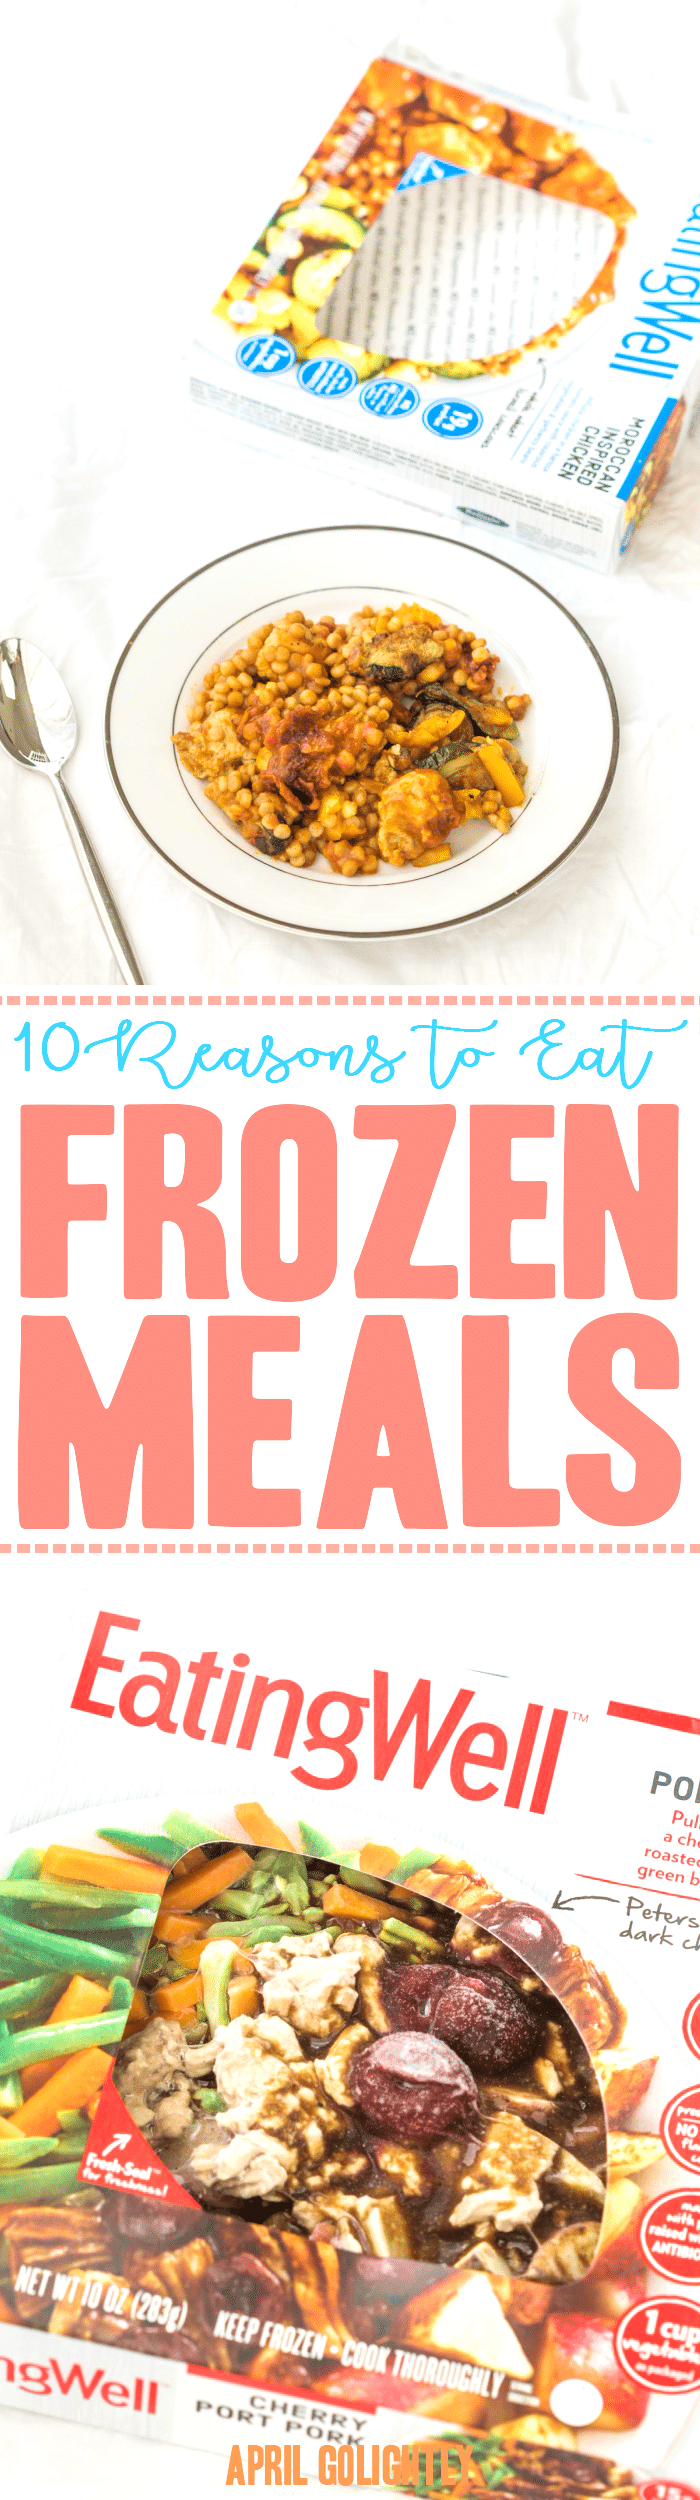 10-reasons-to-eat-frozen-meals